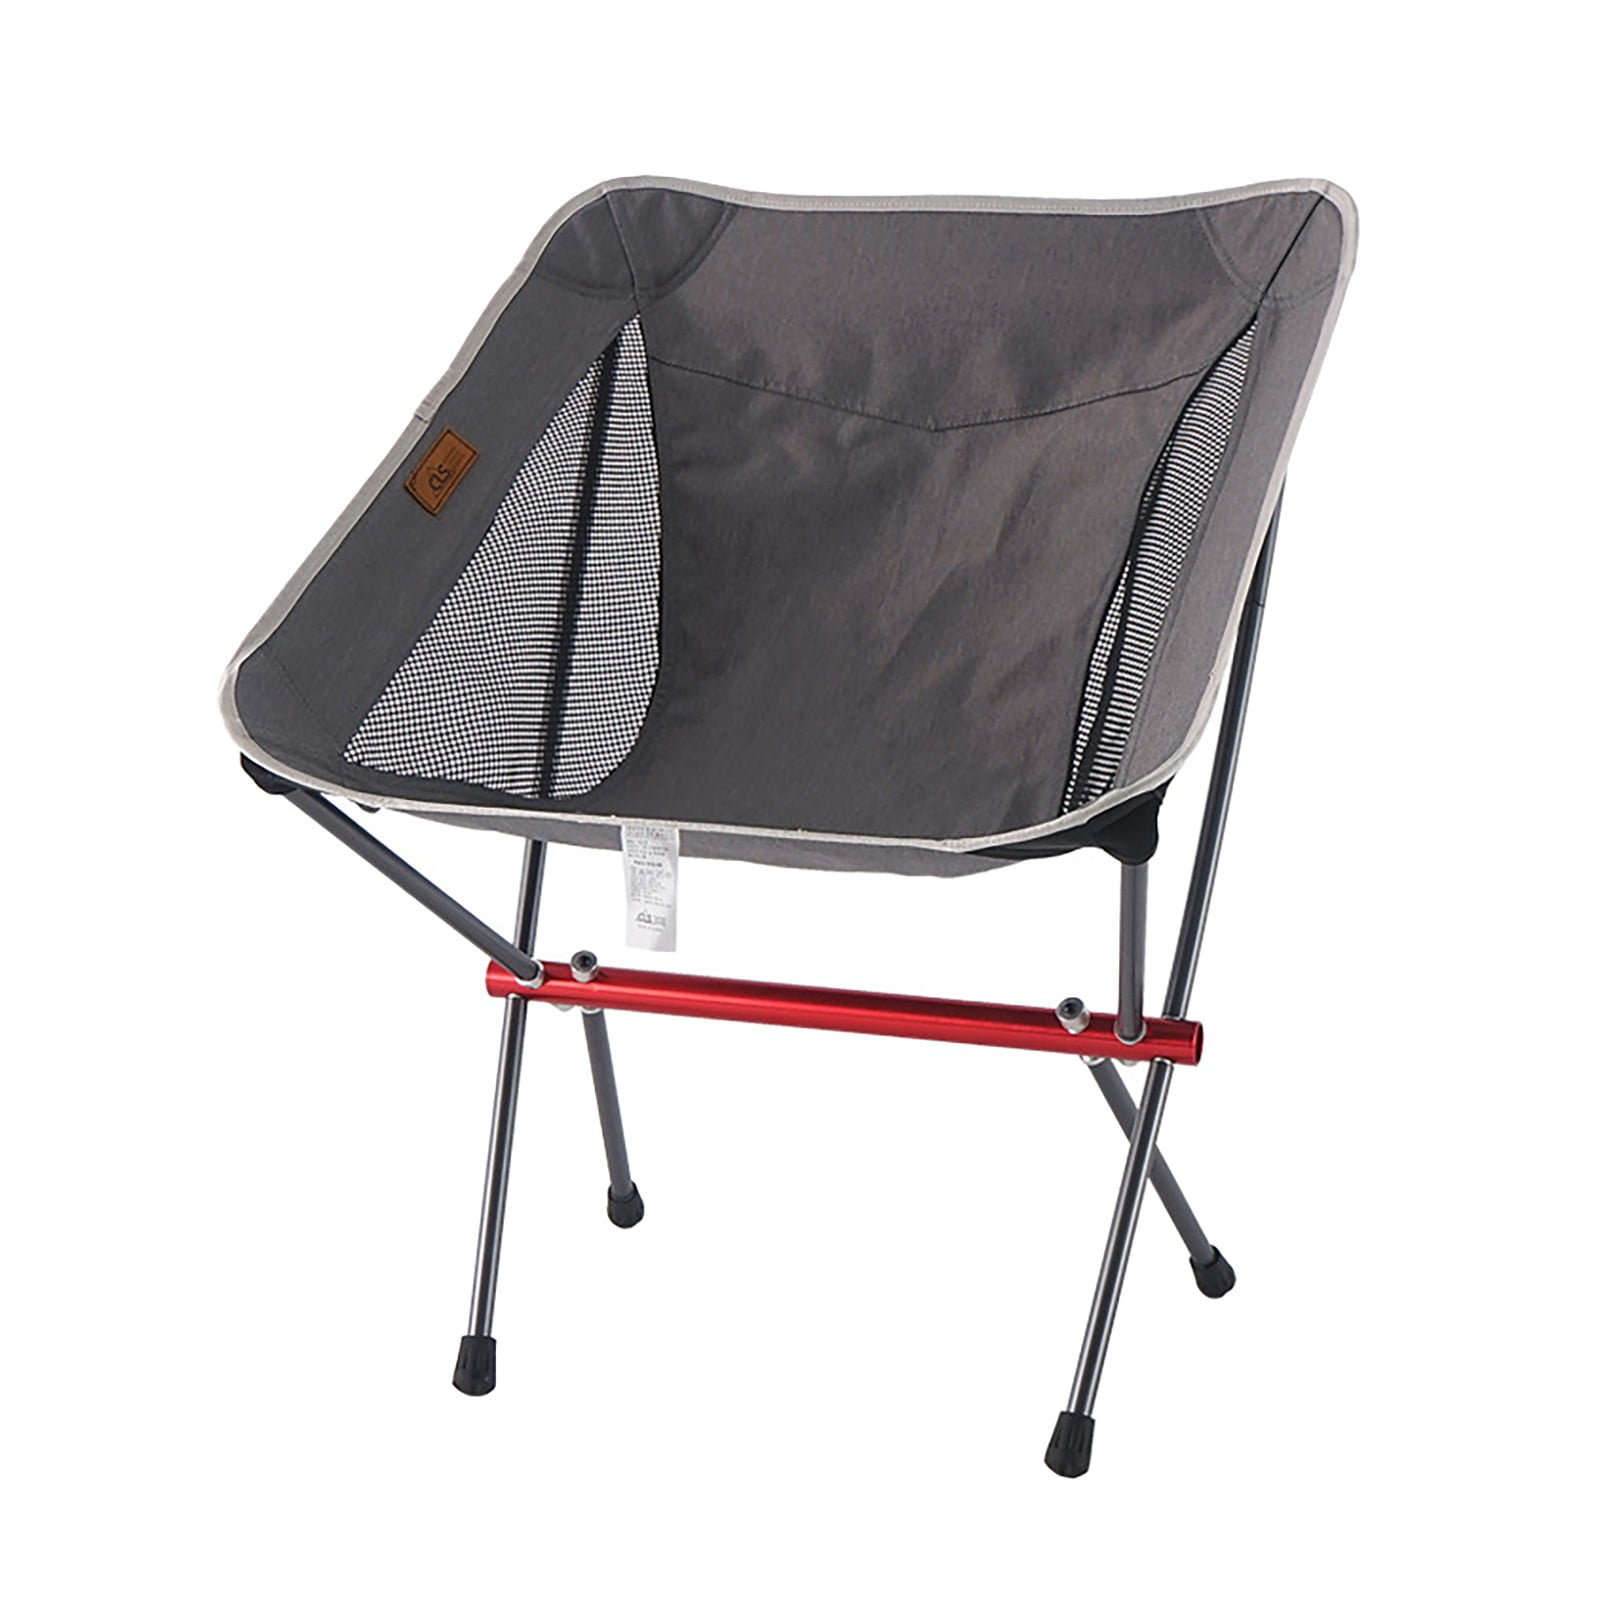 Robens Searcher Folding Camping Chair Lightweight Small Pack Size 